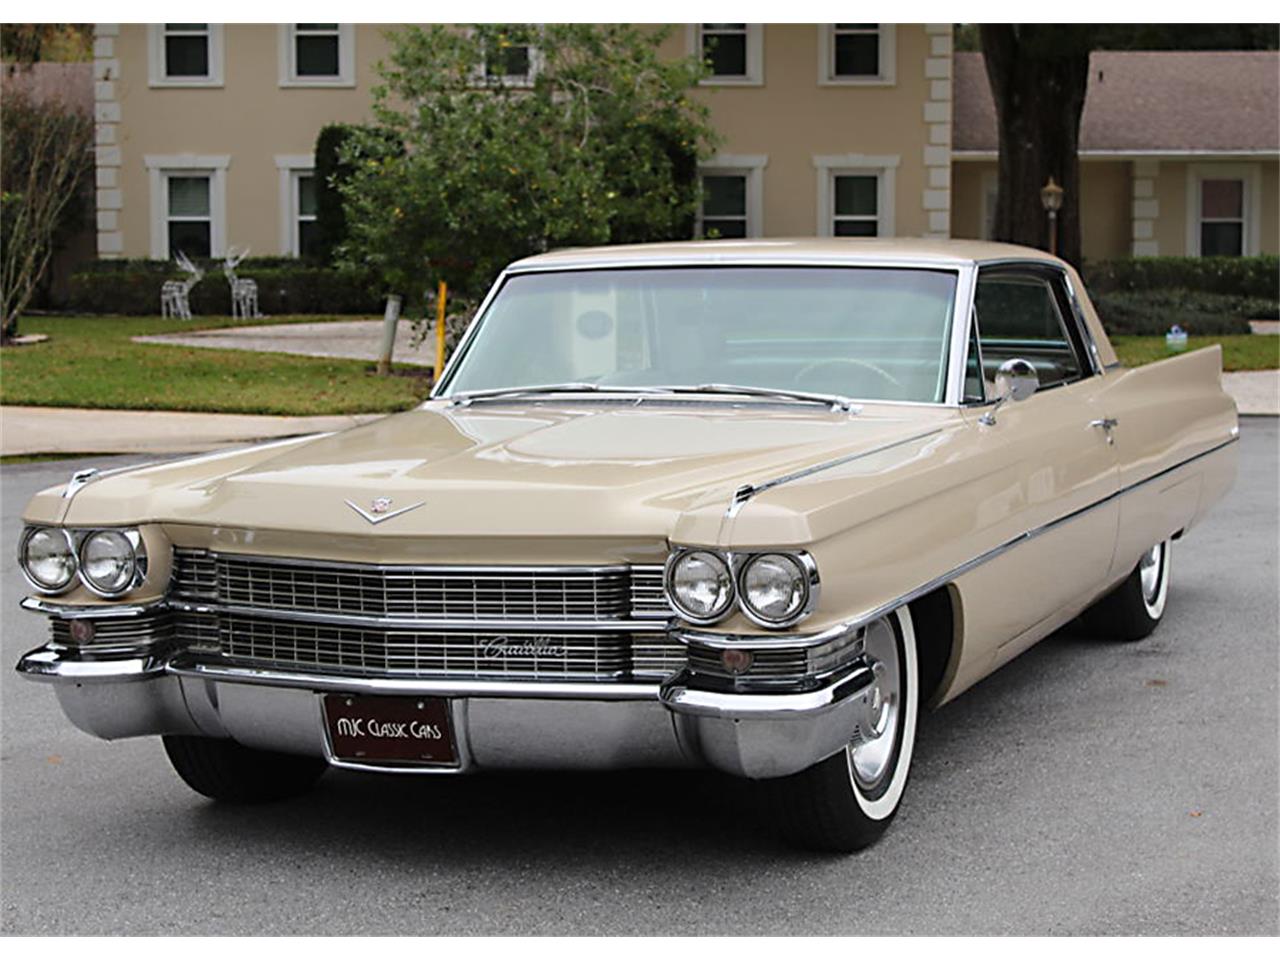 sand 1963 Cadillac Coupe DeVille for sale located in Lakeland, Florida - $2...